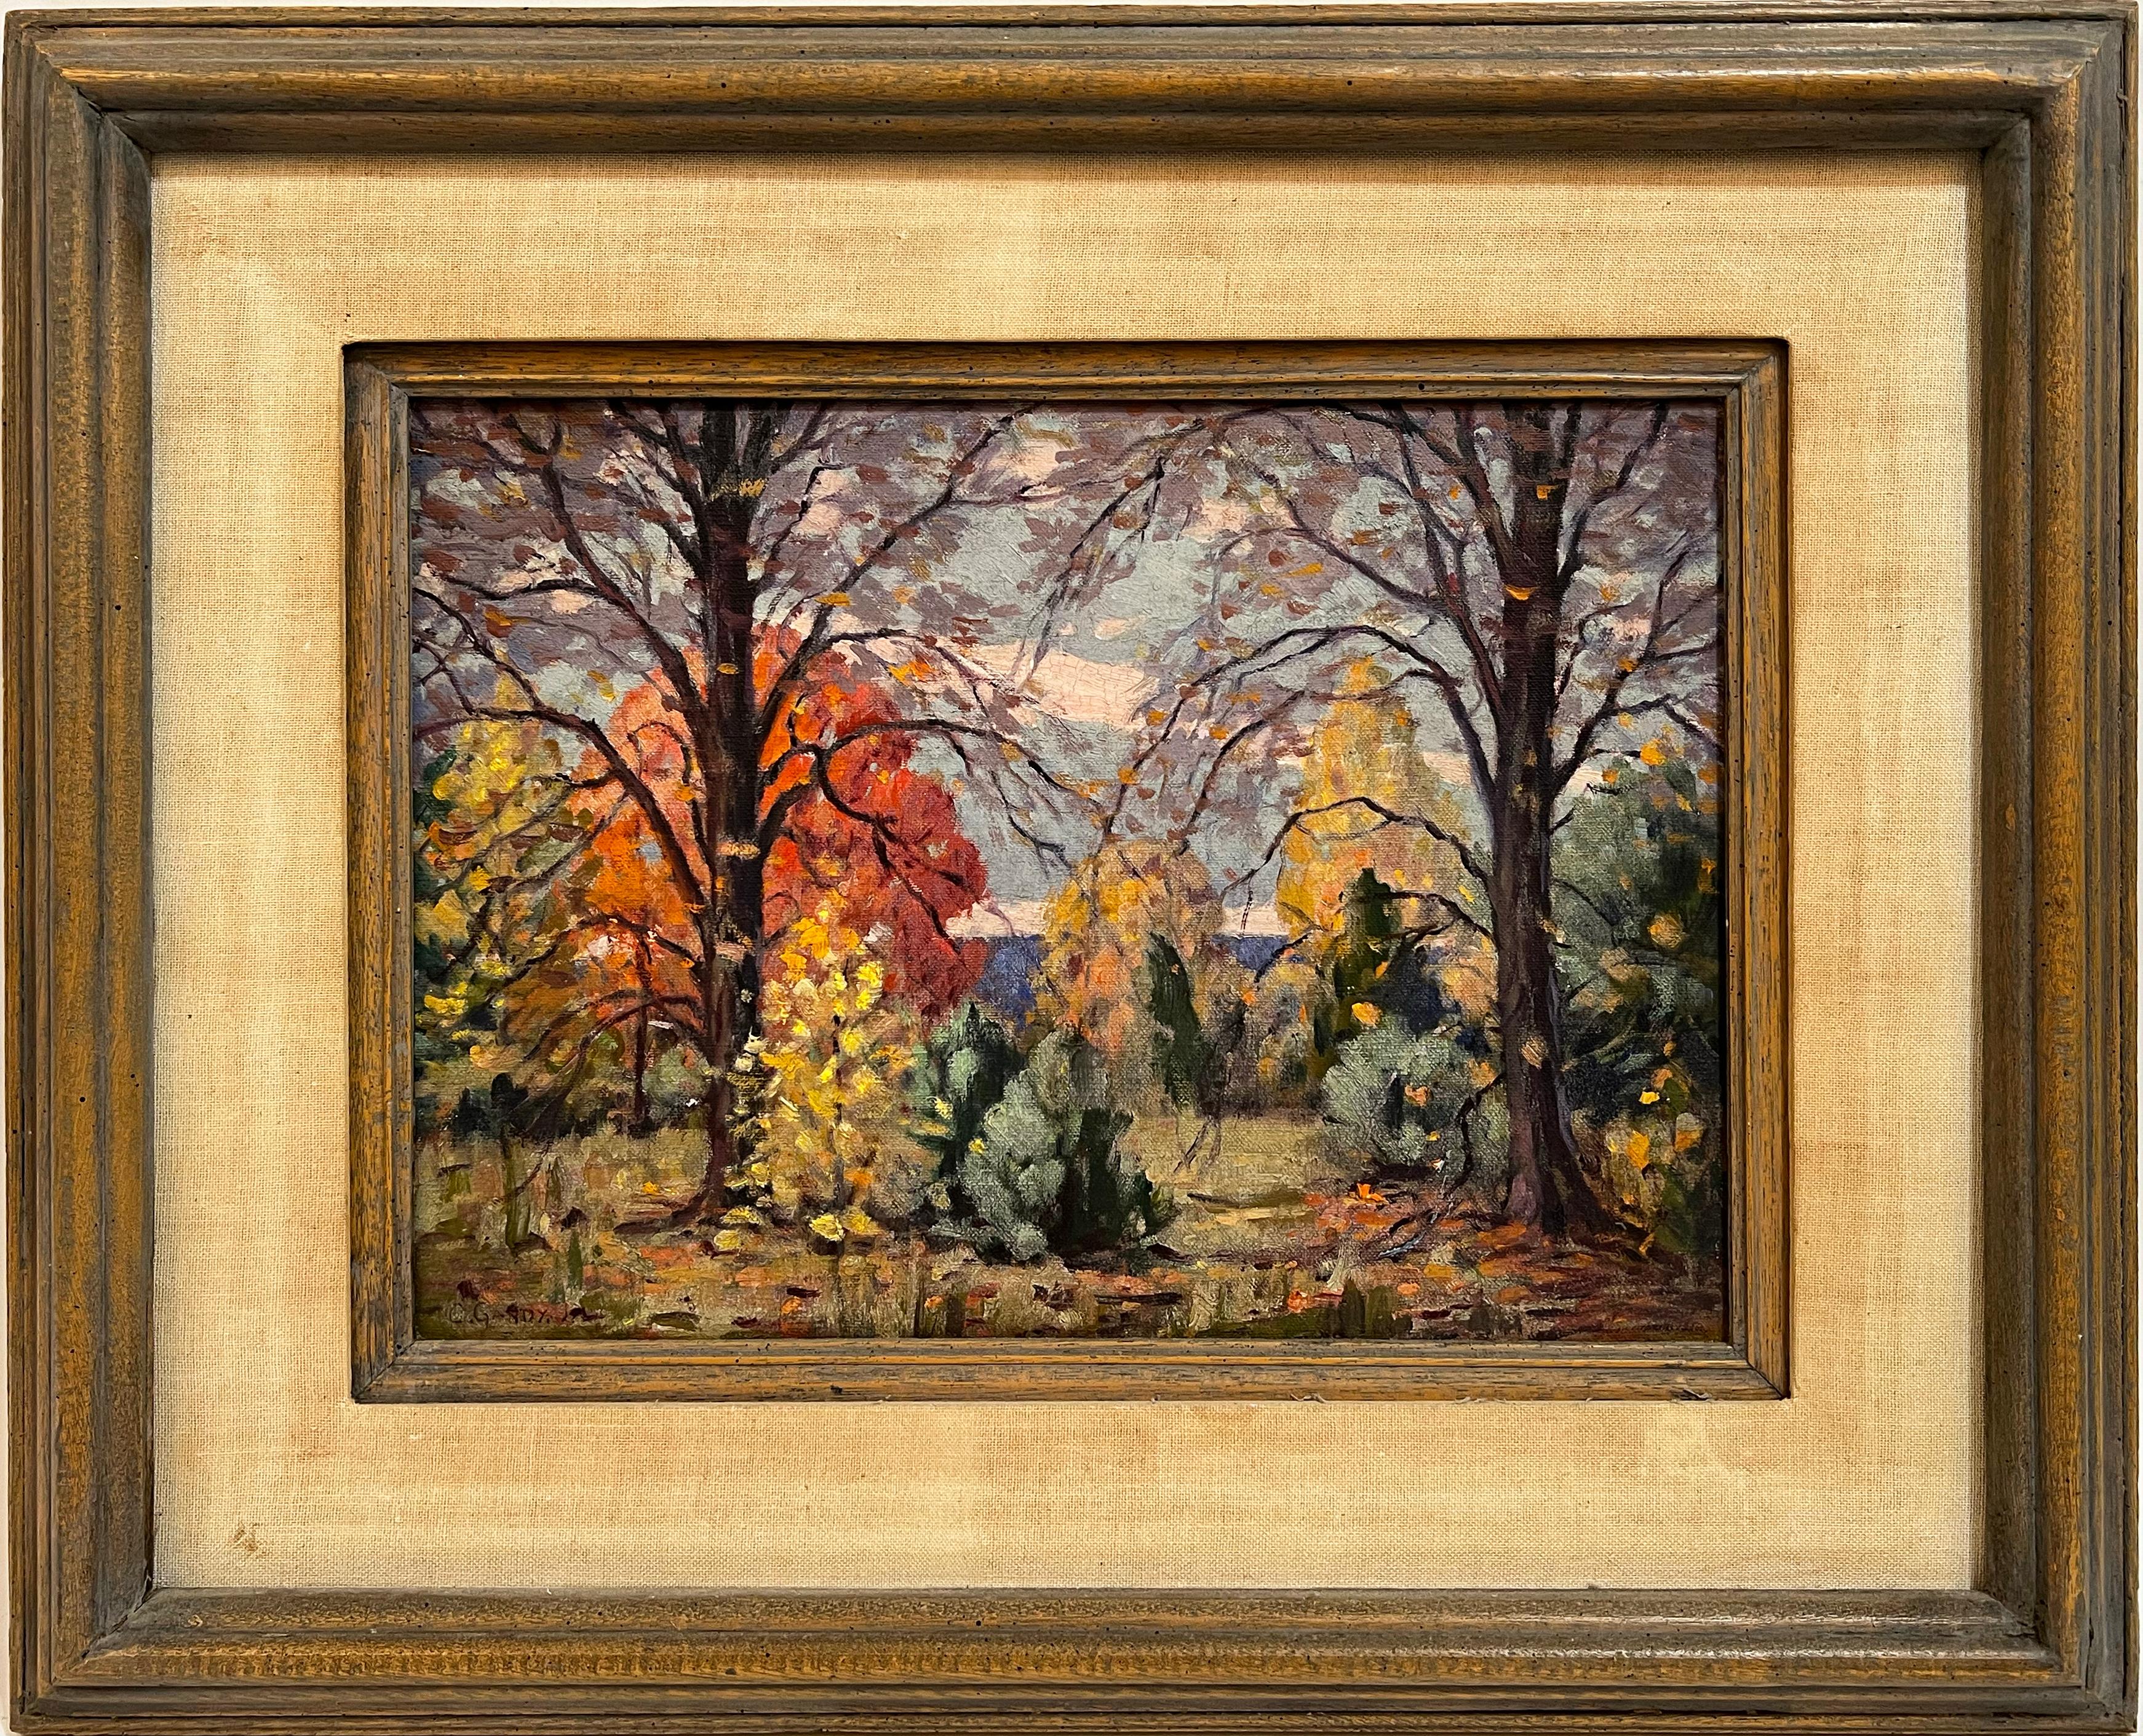 Antique American impressionist landscape oil painting.  Oil on board, circa 1920.  Signed.  Framed.  Image size, 16